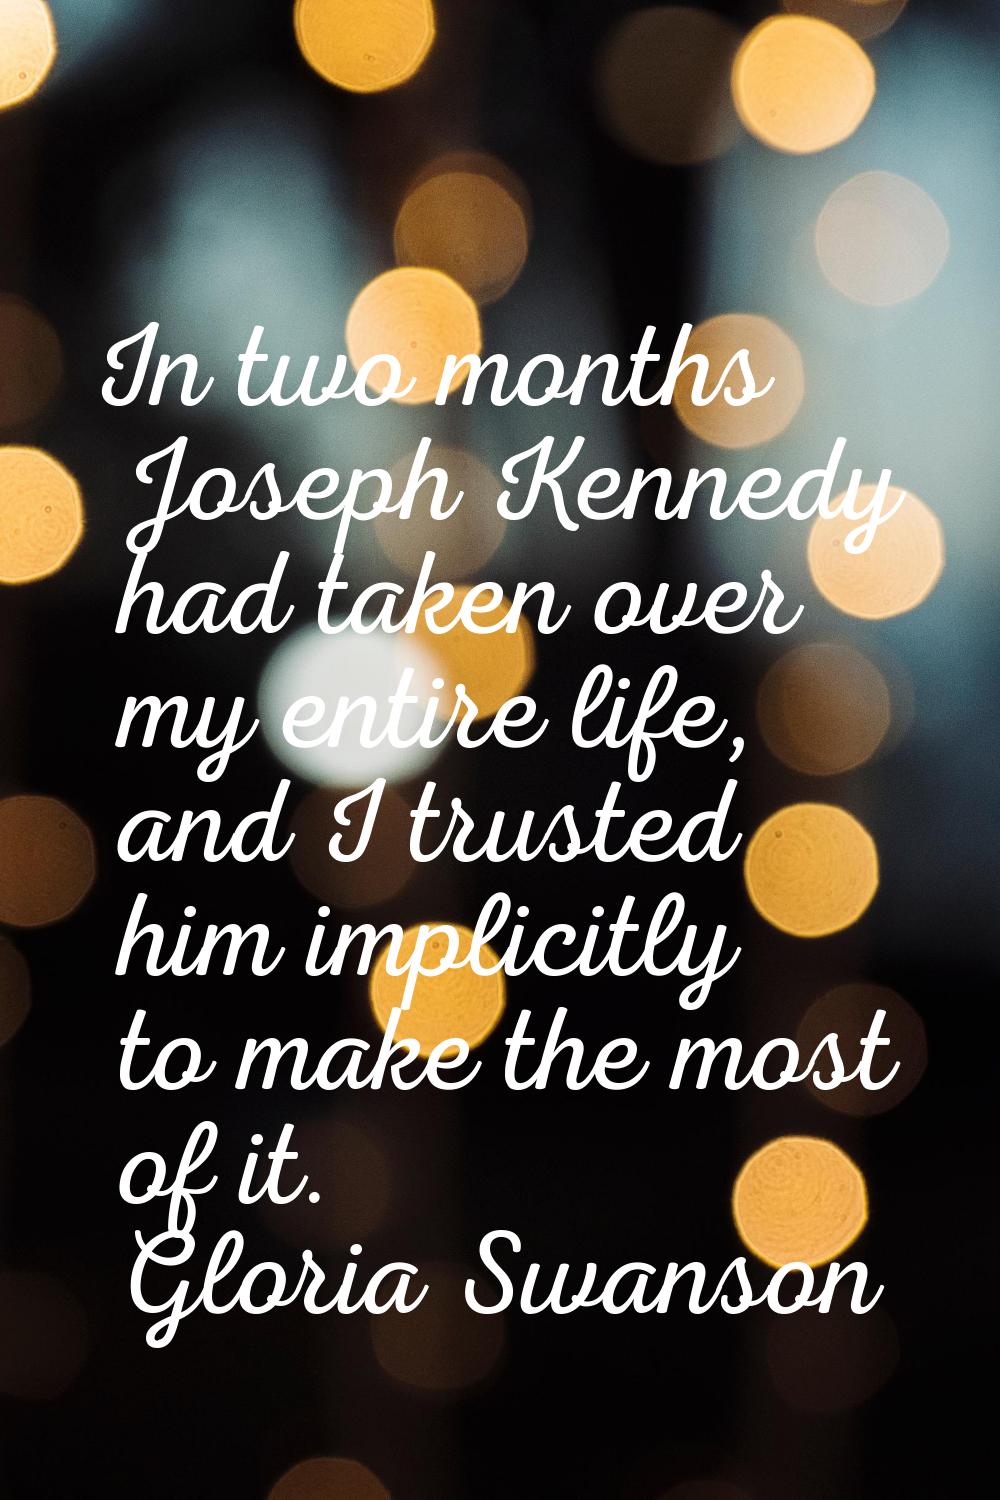 In two months Joseph Kennedy had taken over my entire life, and I trusted him implicitly to make th